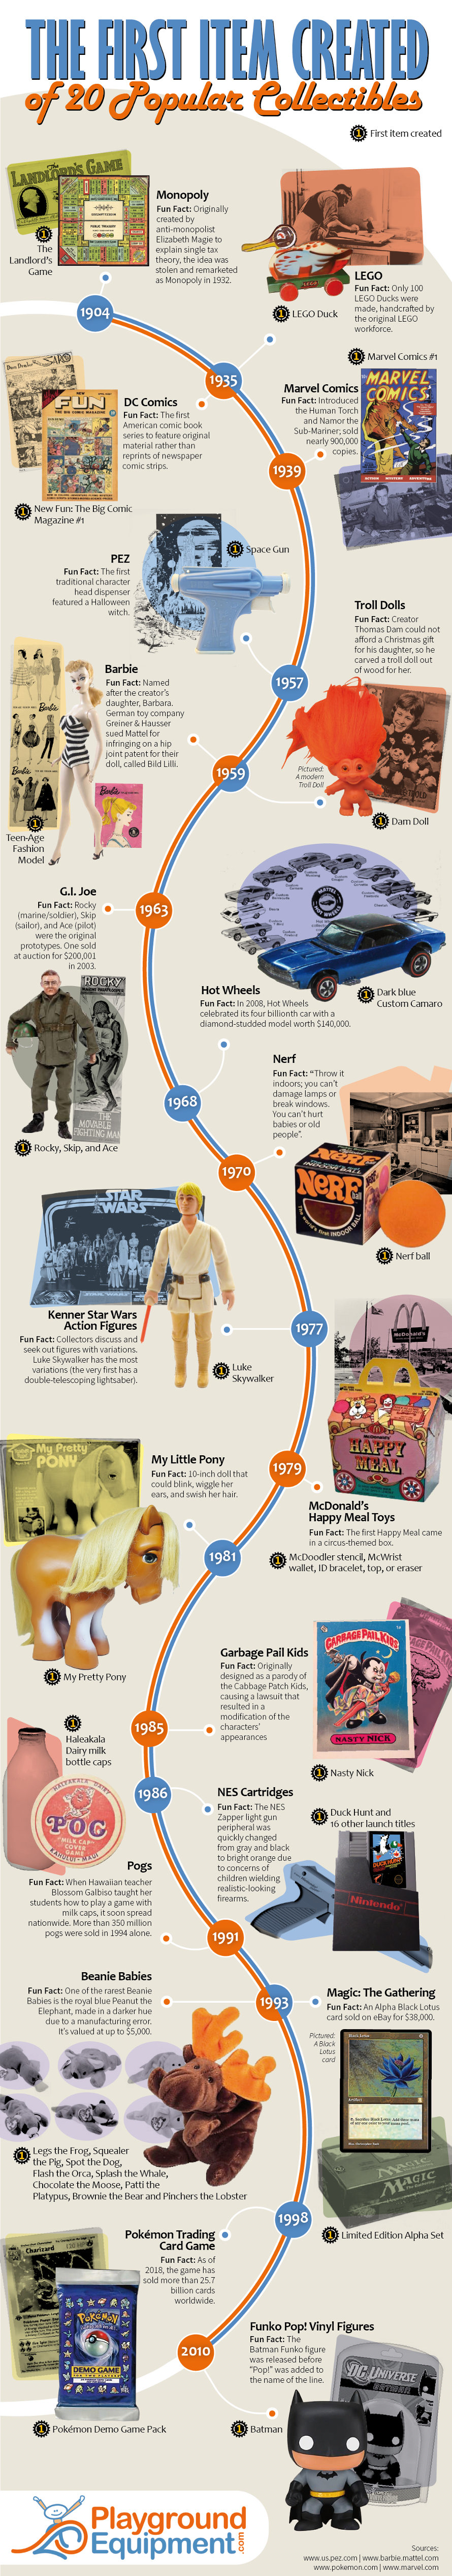 History of 20 Popular Children’s Collectibles and How They Started - Infographic